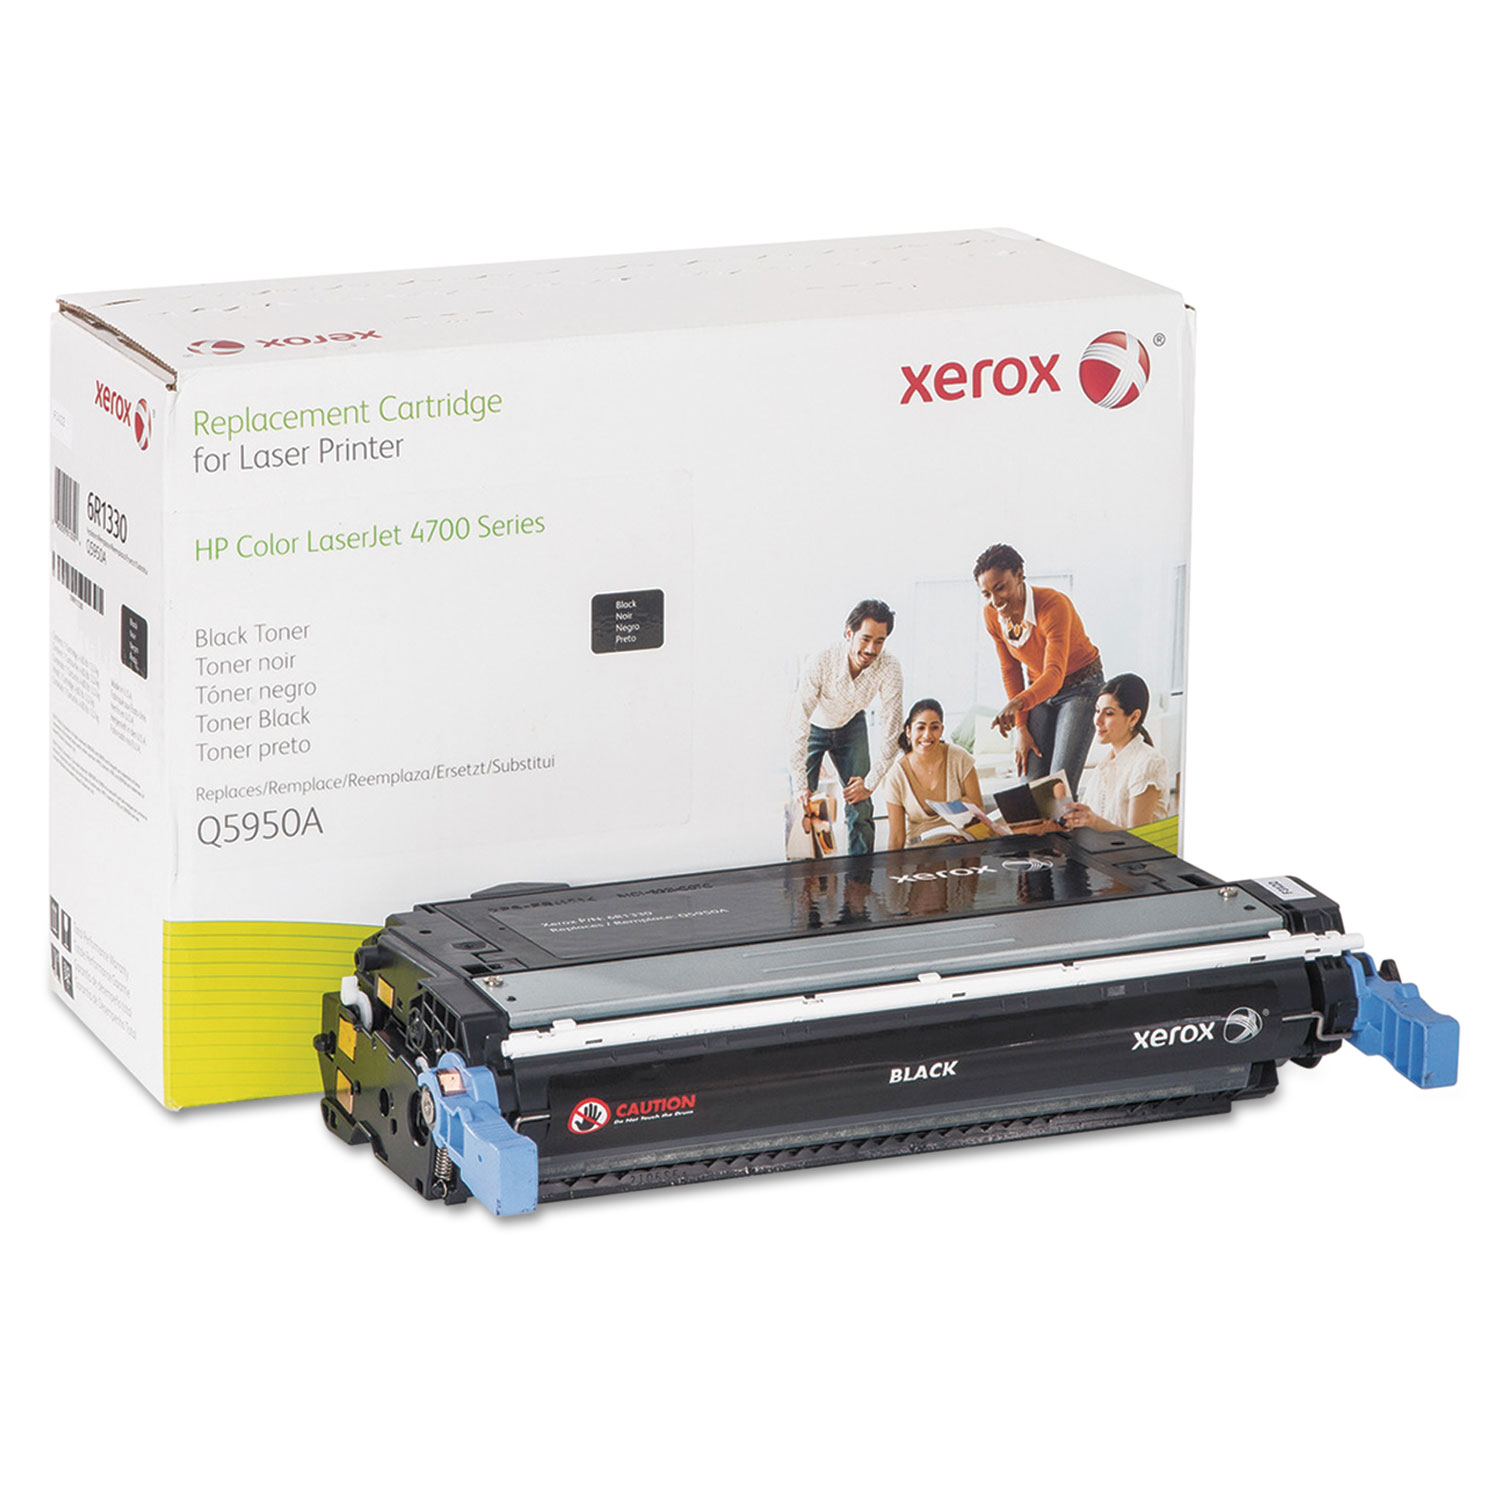  Xerox 006R01330 006R01330 Replacement Toner for Q5950A (643A), Black (XER006R01330) 